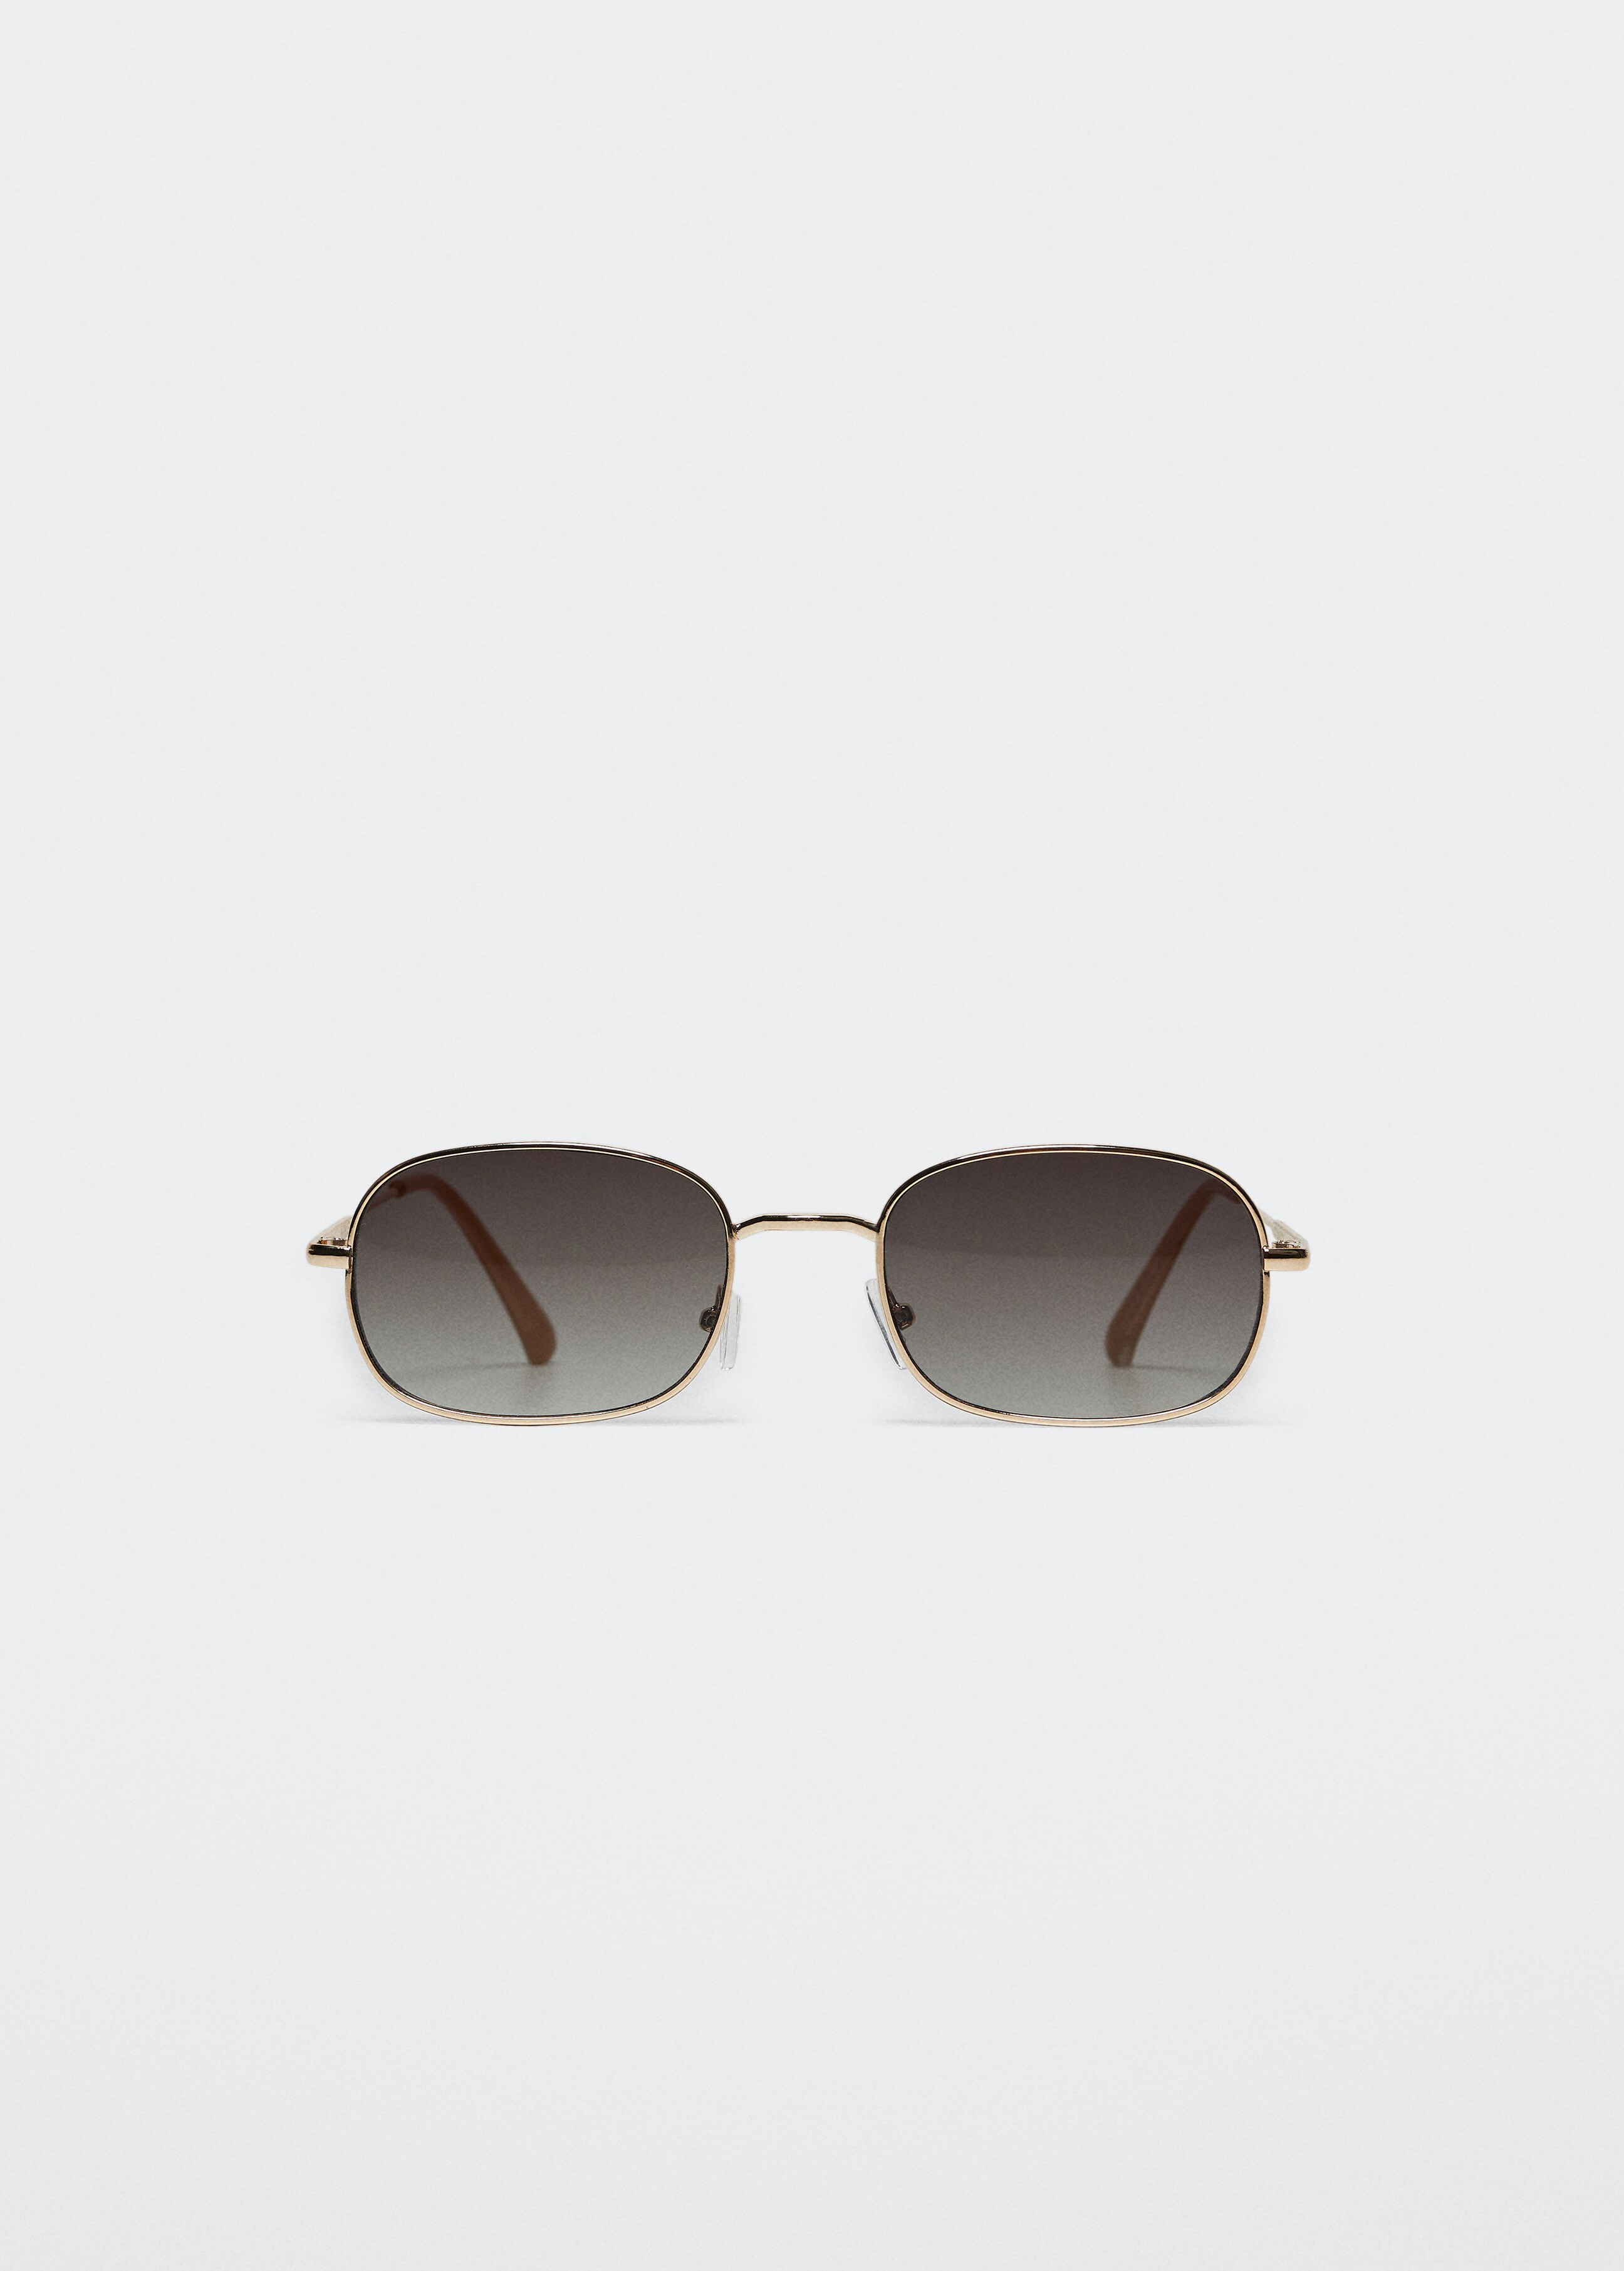 Metallic frame sunglasses - Article without model